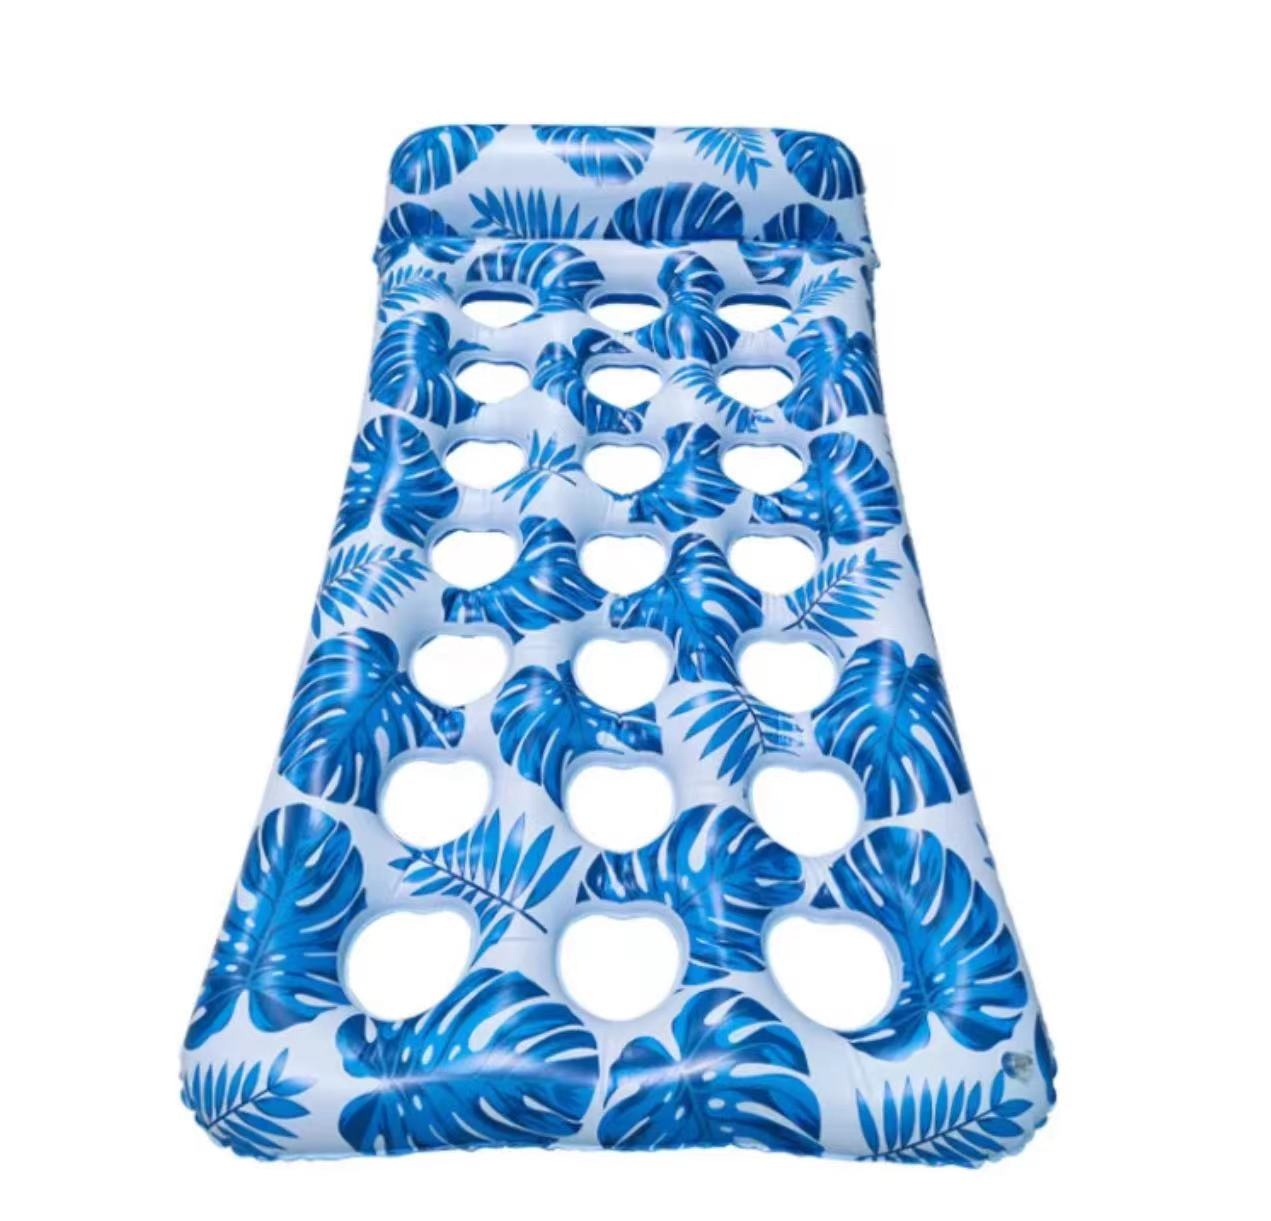 Hot sellingCustom OEM inflatable water floating mattress bed beach mat for swimming inflatable pool float  View More